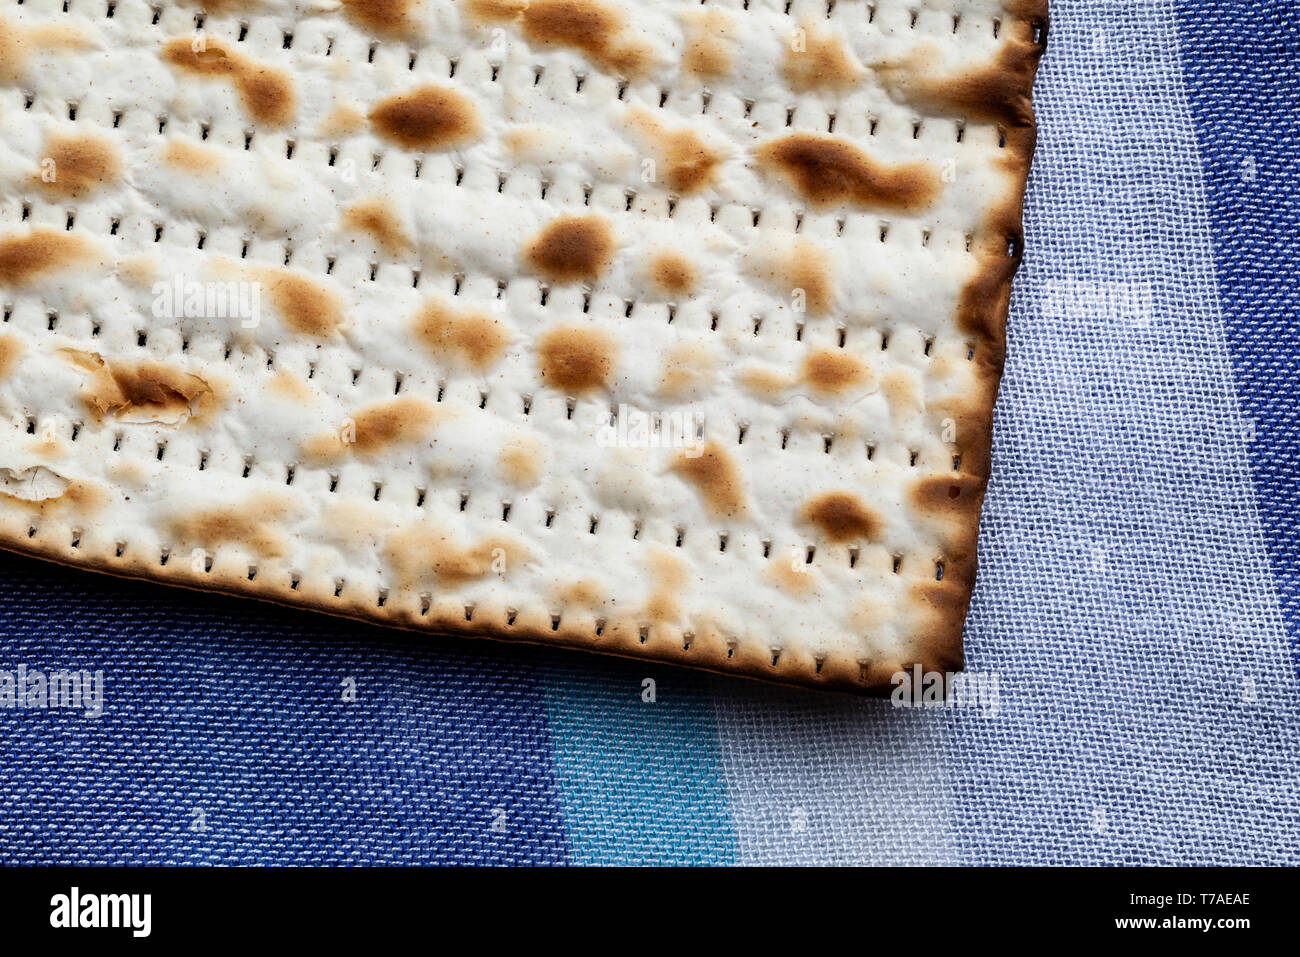 Matzo on a Blue and White Background Stock Photo